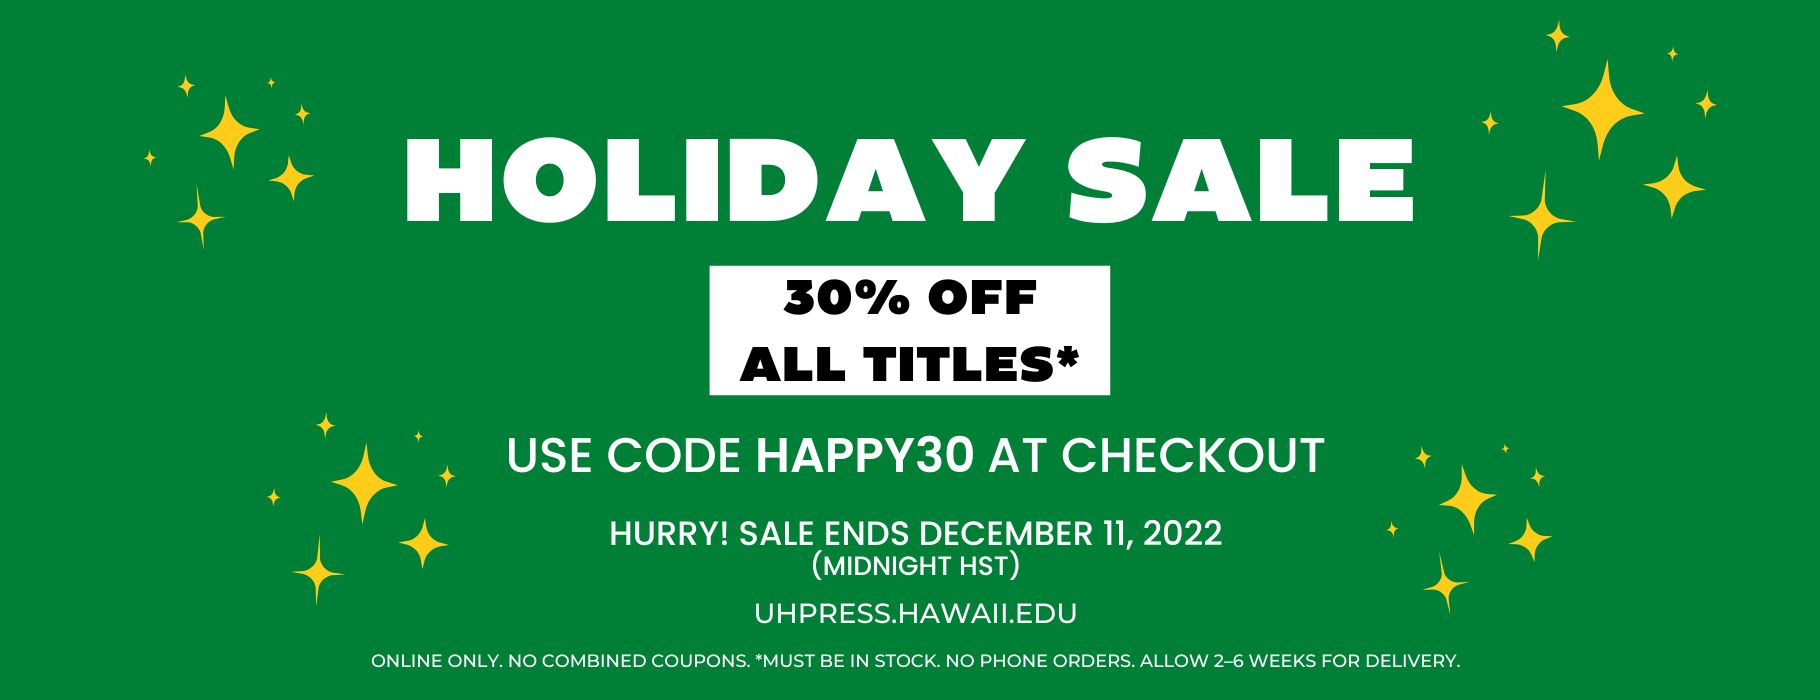 holiday sale banner 2022